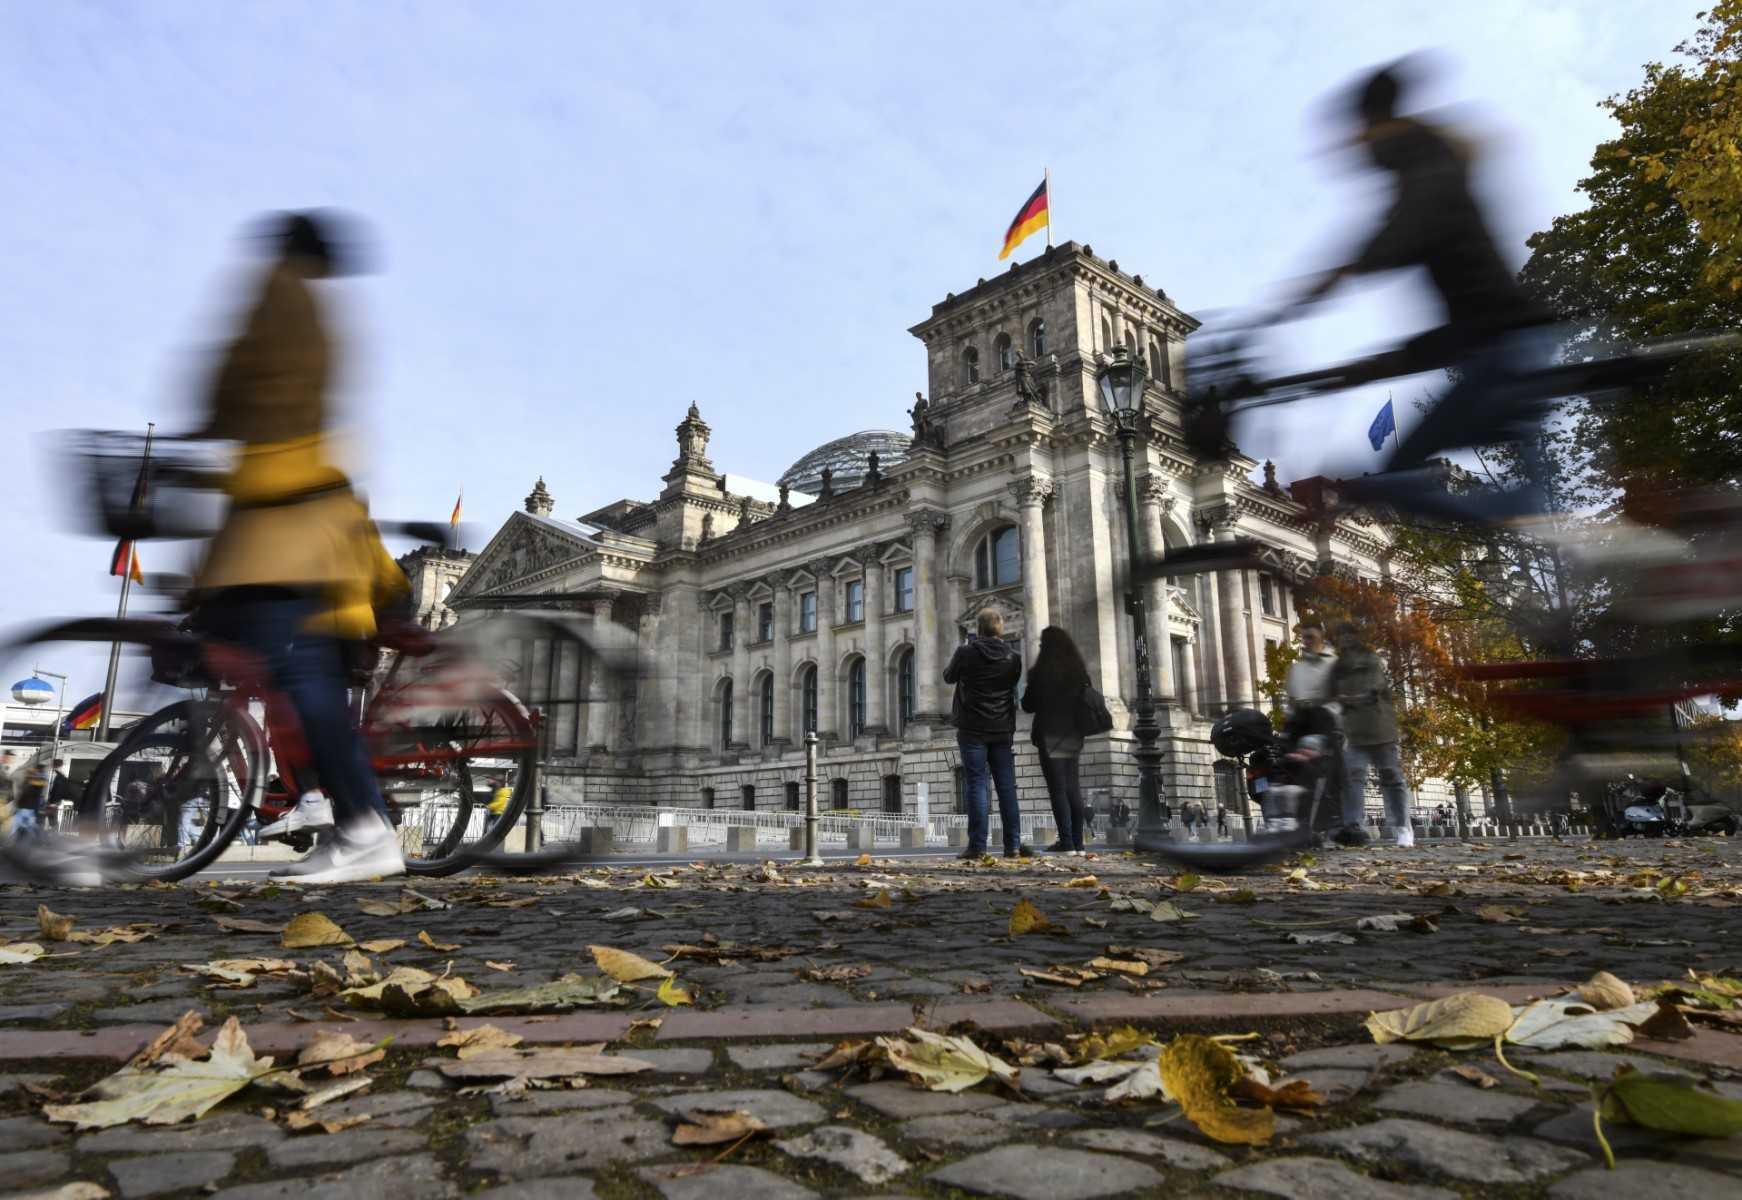 Leaves lie on the ground as pedestrians and bicycle riders are seen in Berlin, Germany, on Oct 19, 2021. Photo: AFP